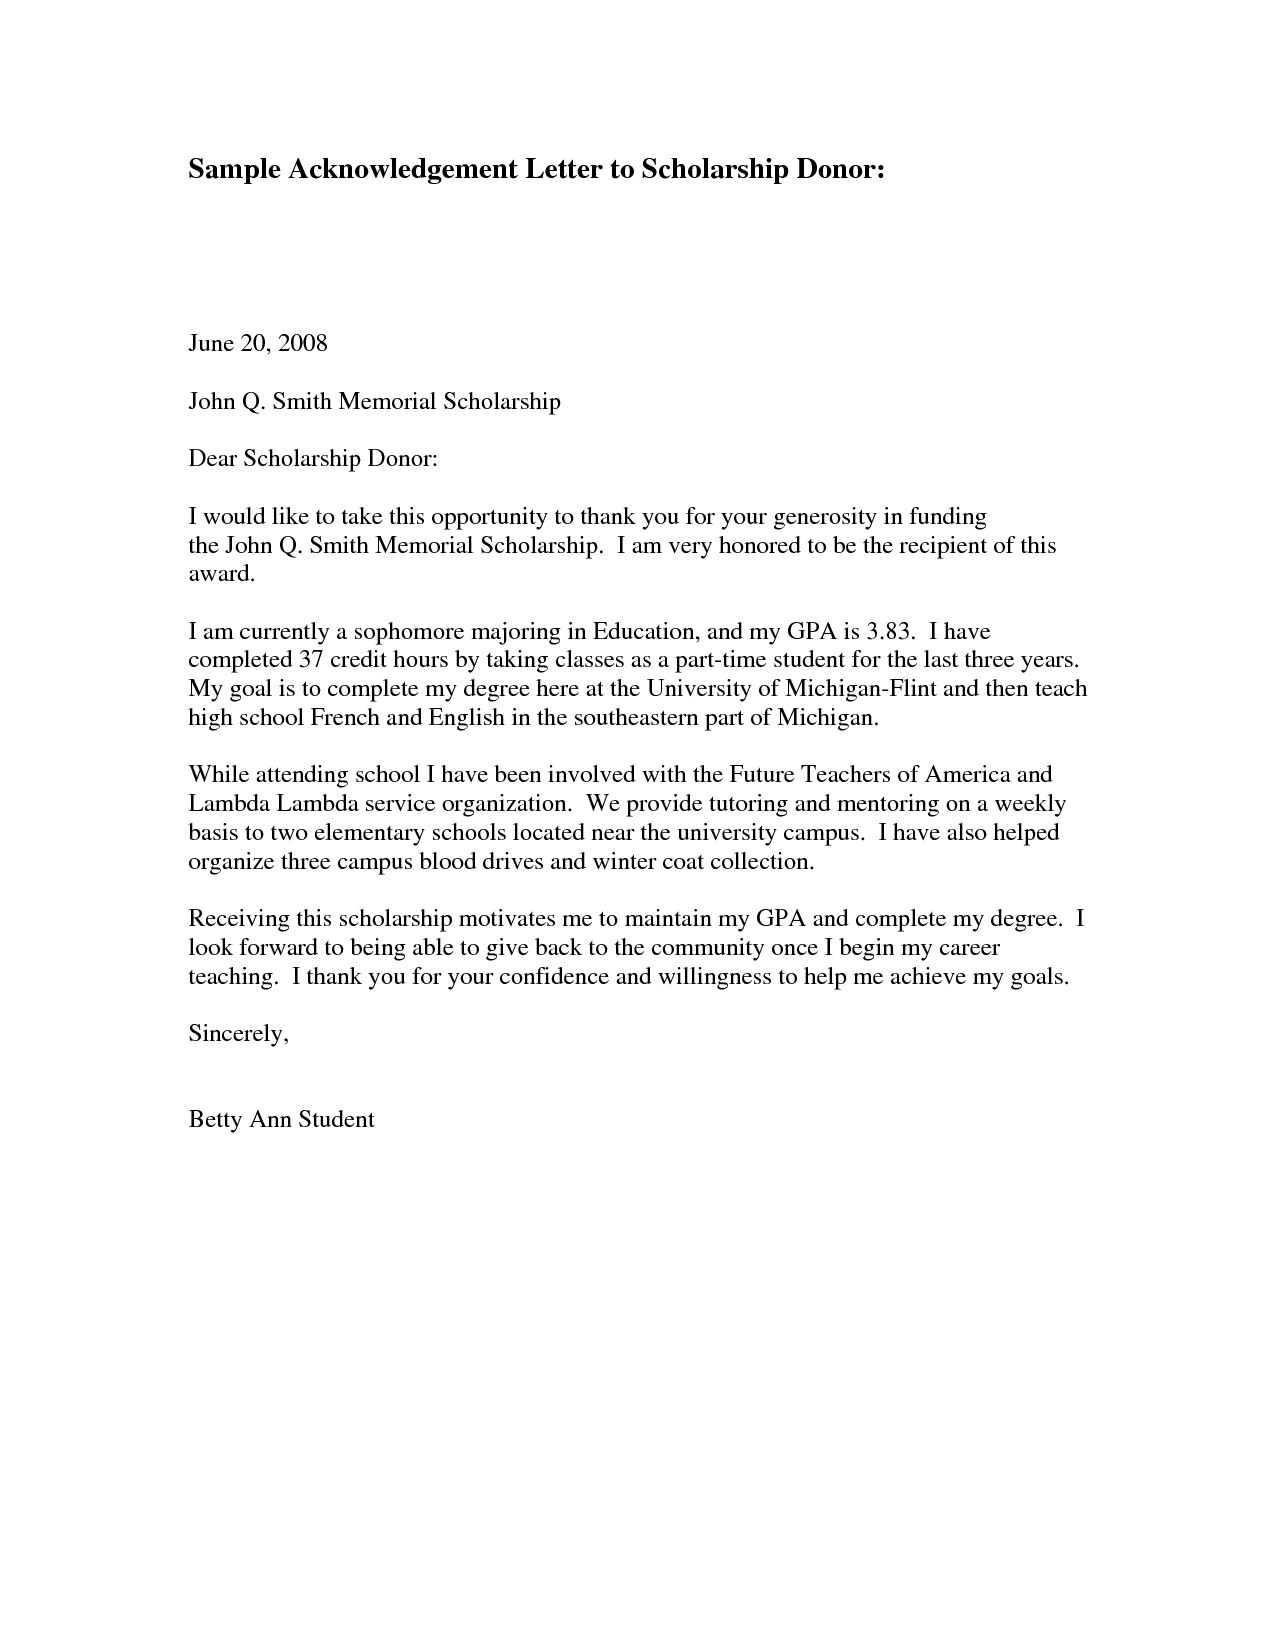 Charitable Donation Letter Template - Scholarship Thank You Letter Sample Http Jobsearch About Od